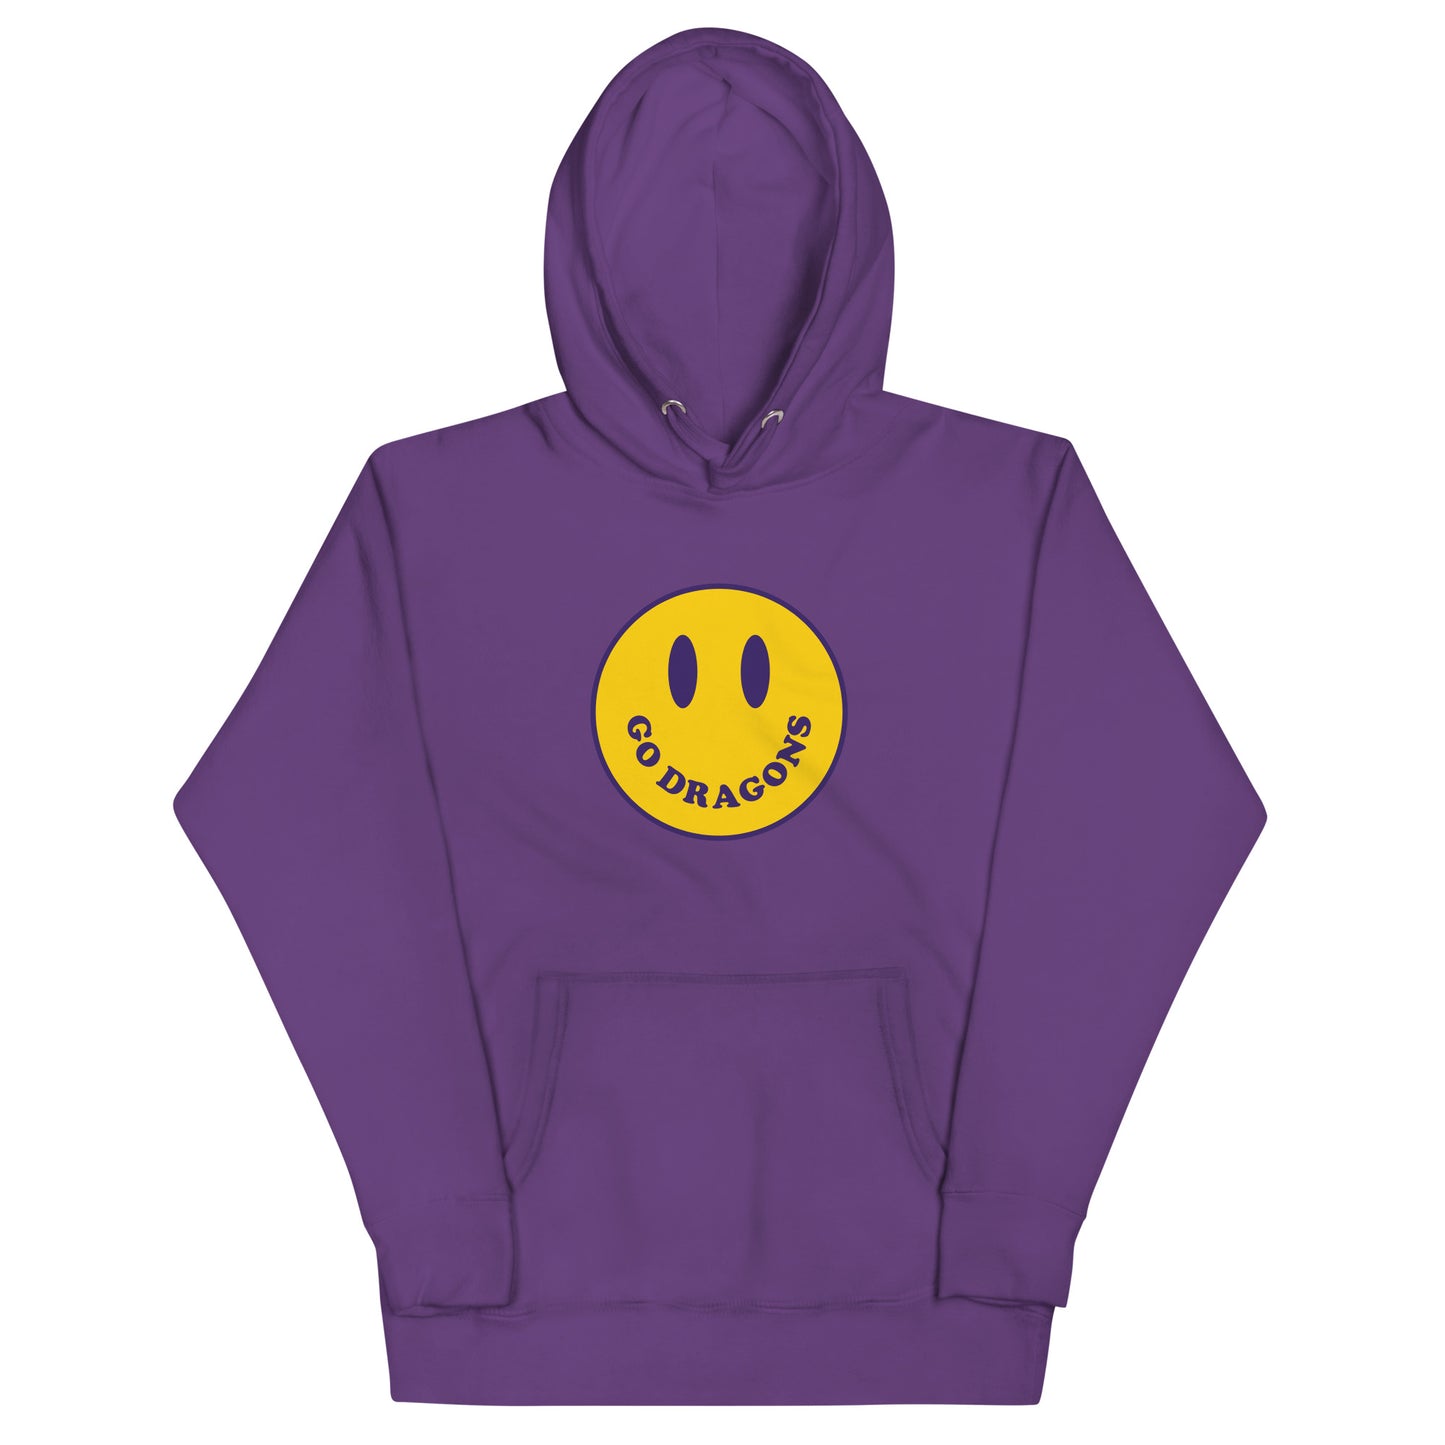 Go Dragons Smiley Face Hoodie